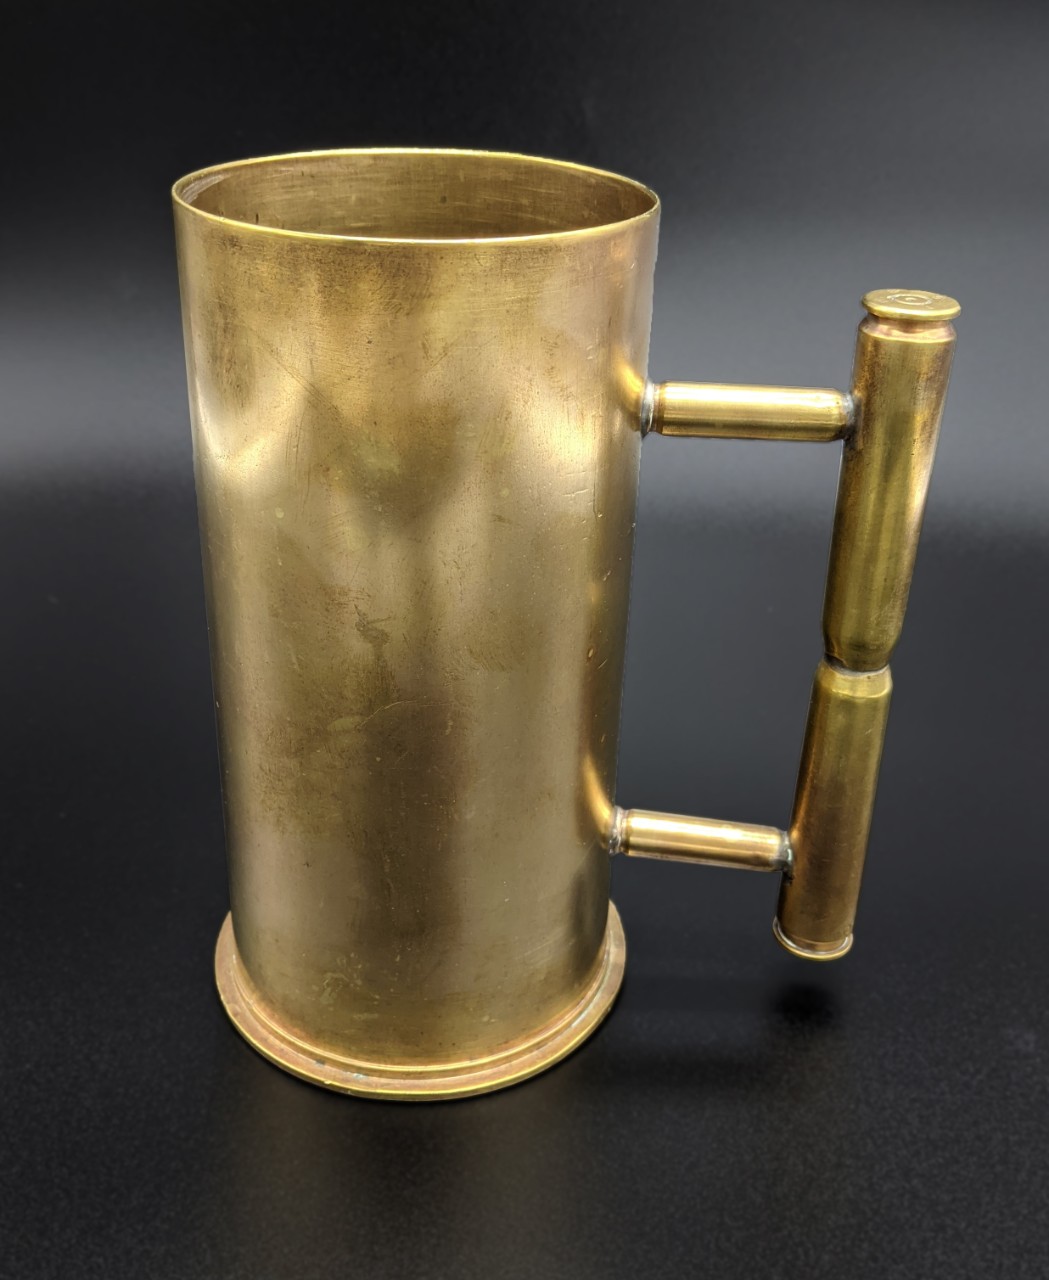 <p>Brassh shell casing cup</p>
